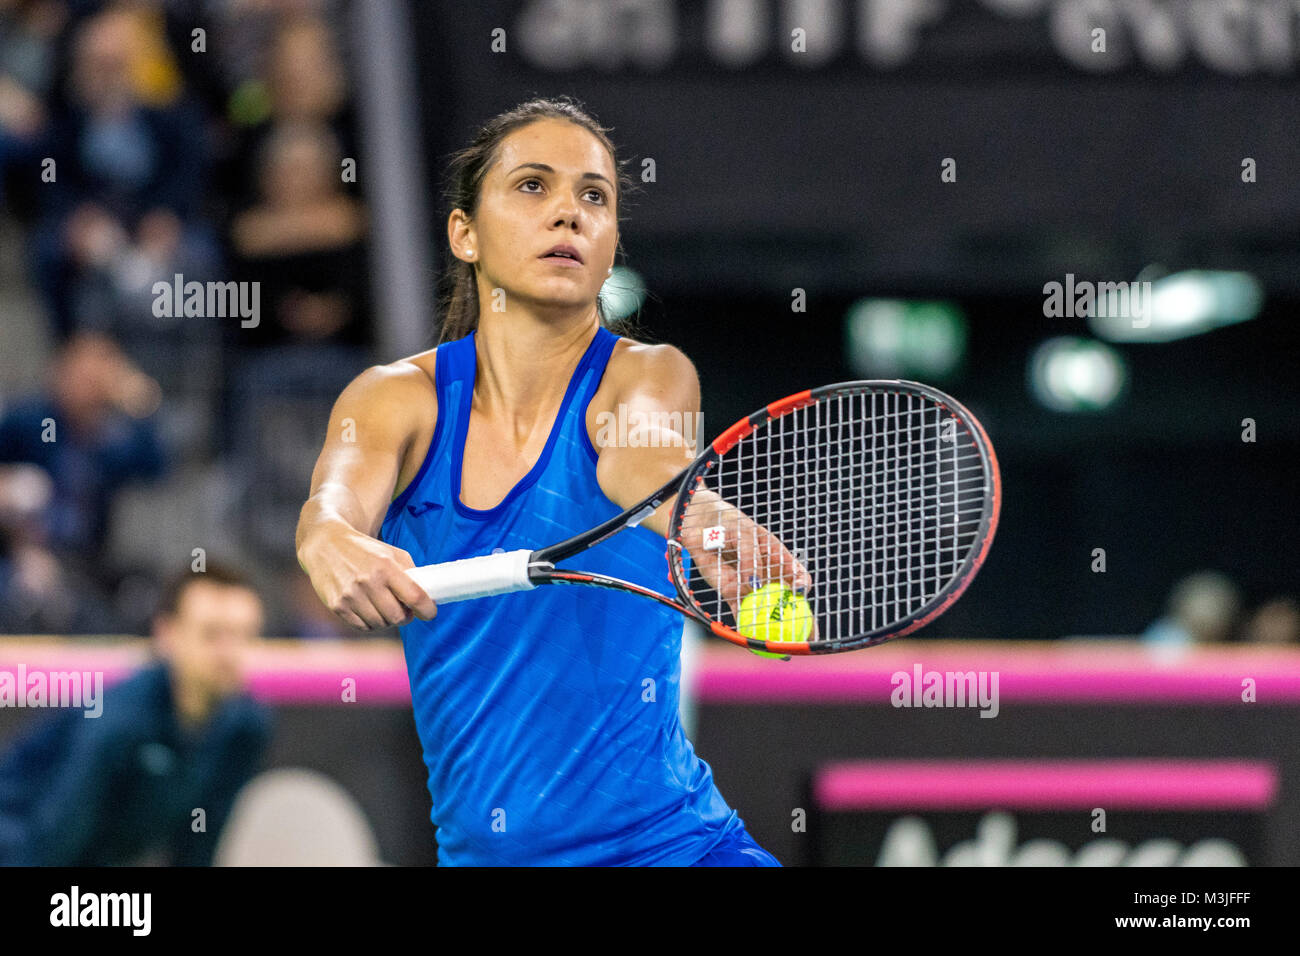 Cluj-Napoca, Romania. 11th February, 2018. Raluca Olaru (ROU) during the  FED Cup by BNP 2018